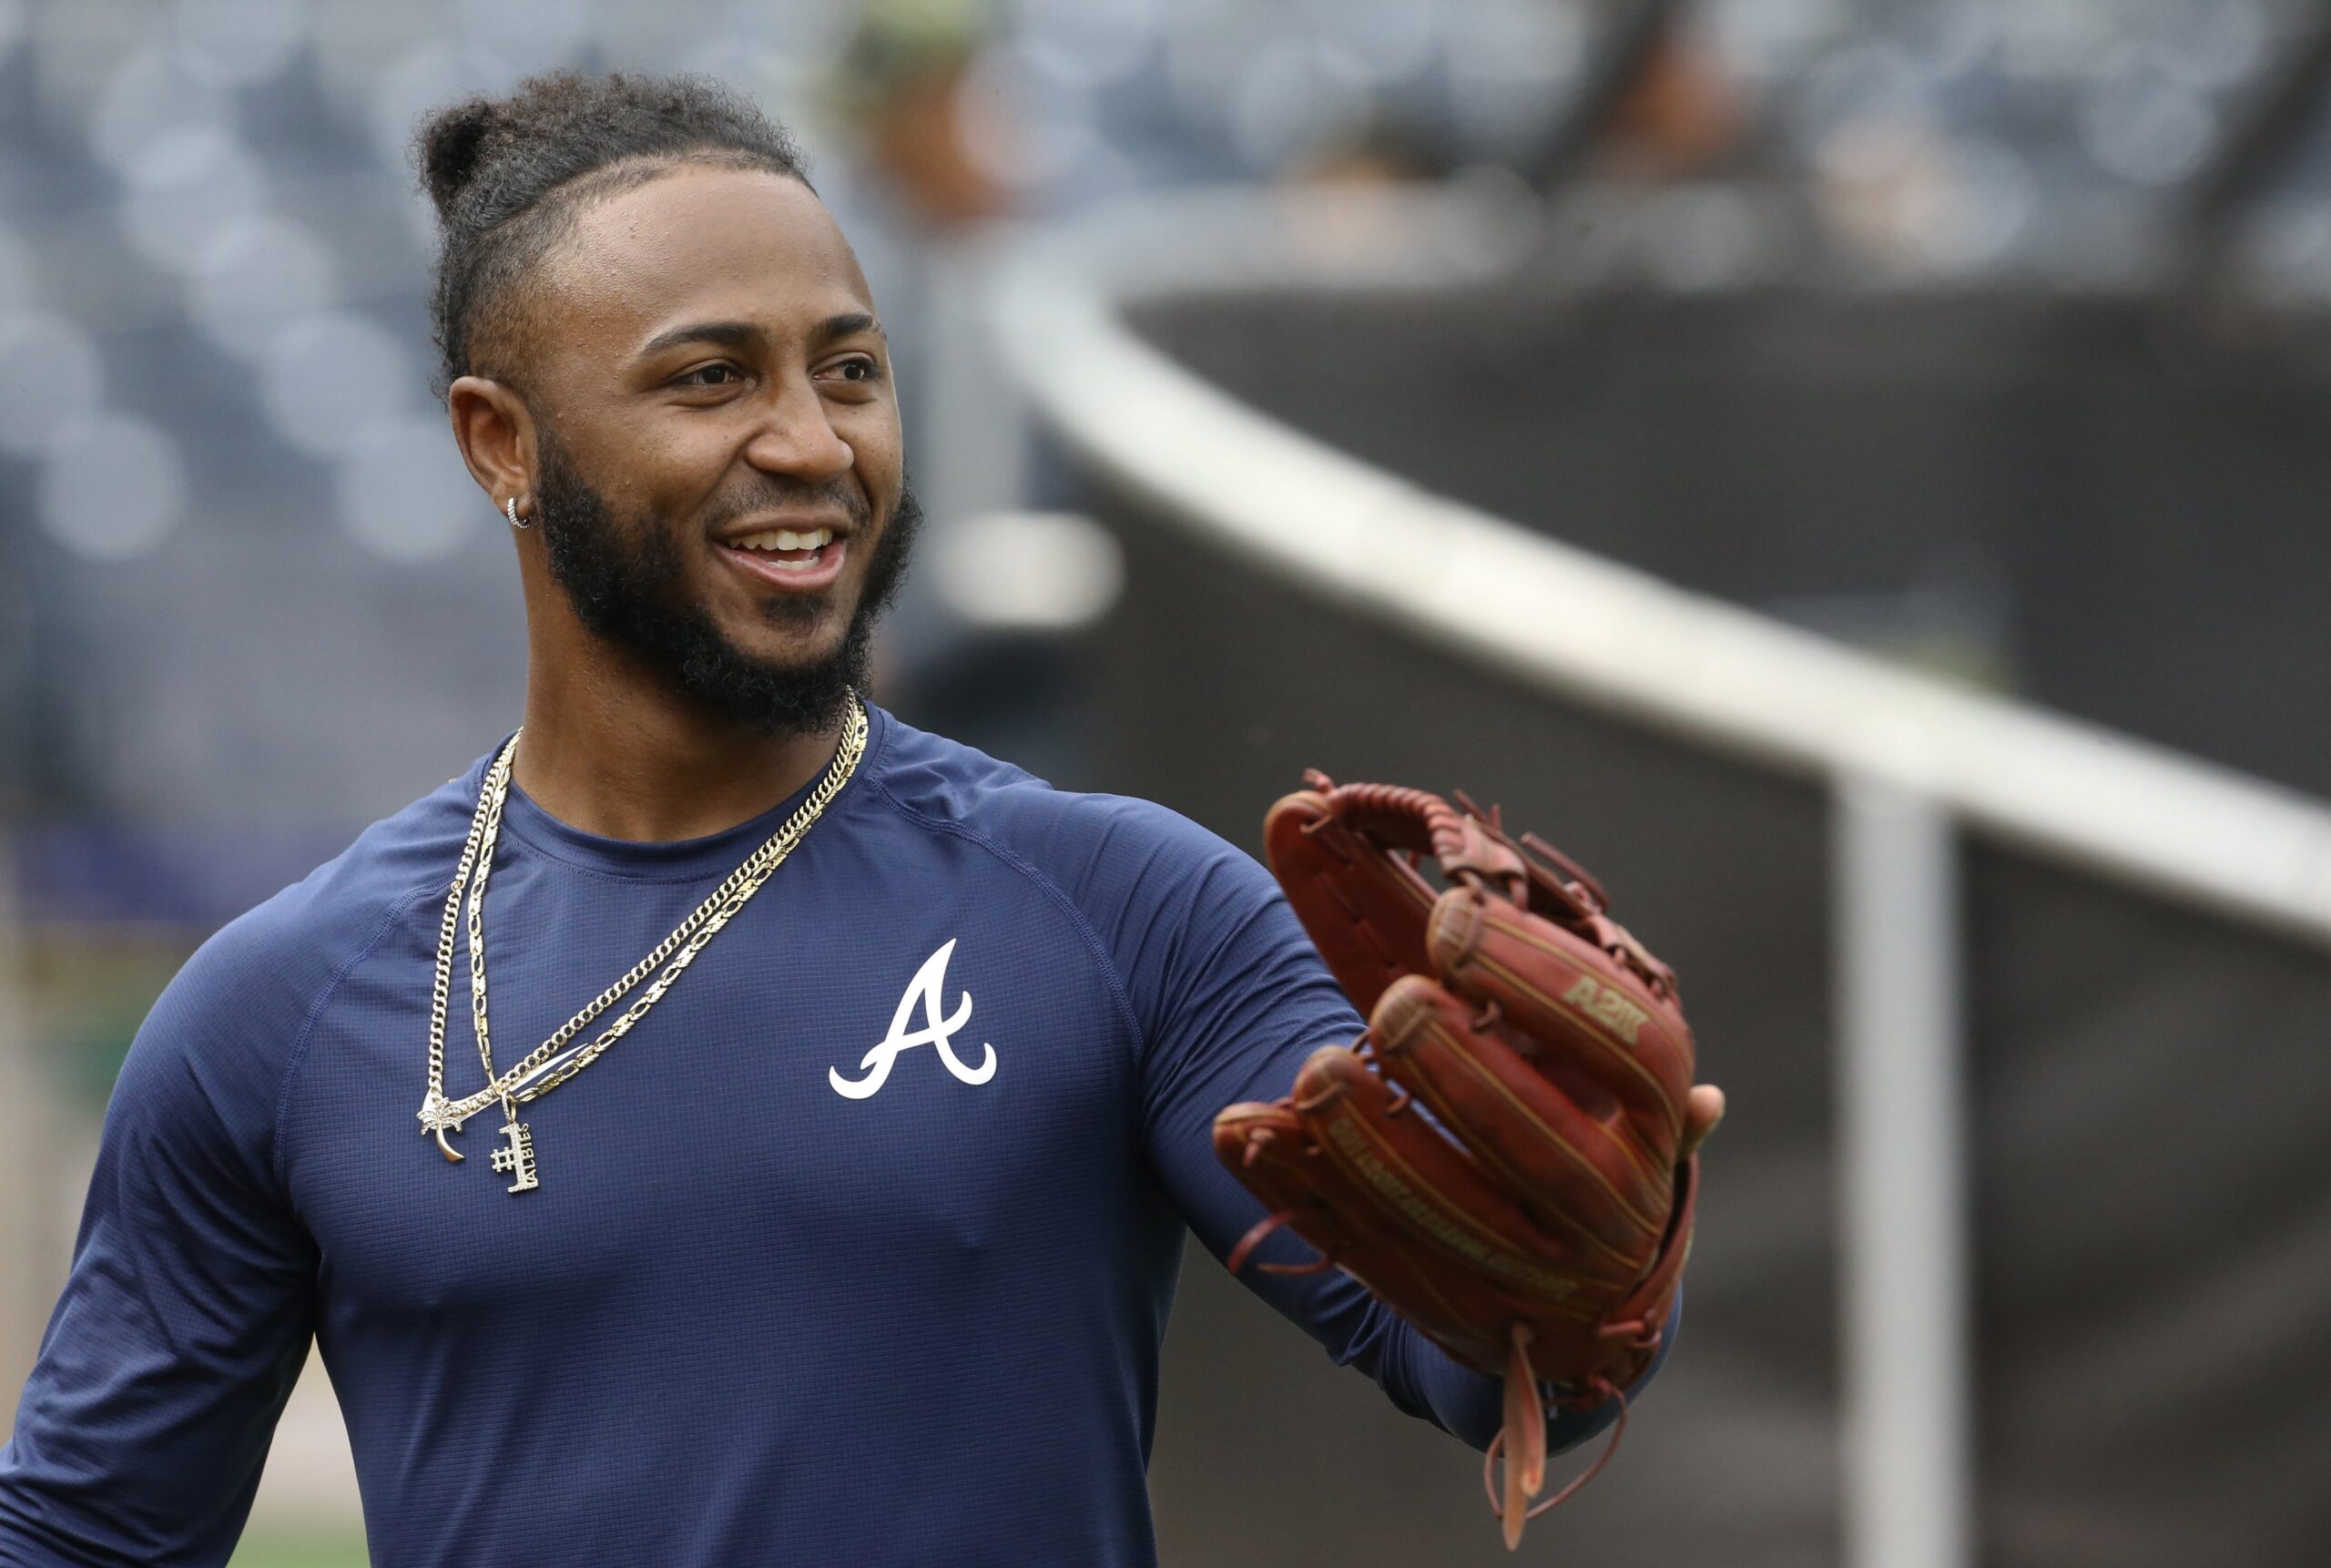 Baseball Player Ozzie Albies Wife: Is He Married To Andrea? Kids, Family And Net Worth In Detail